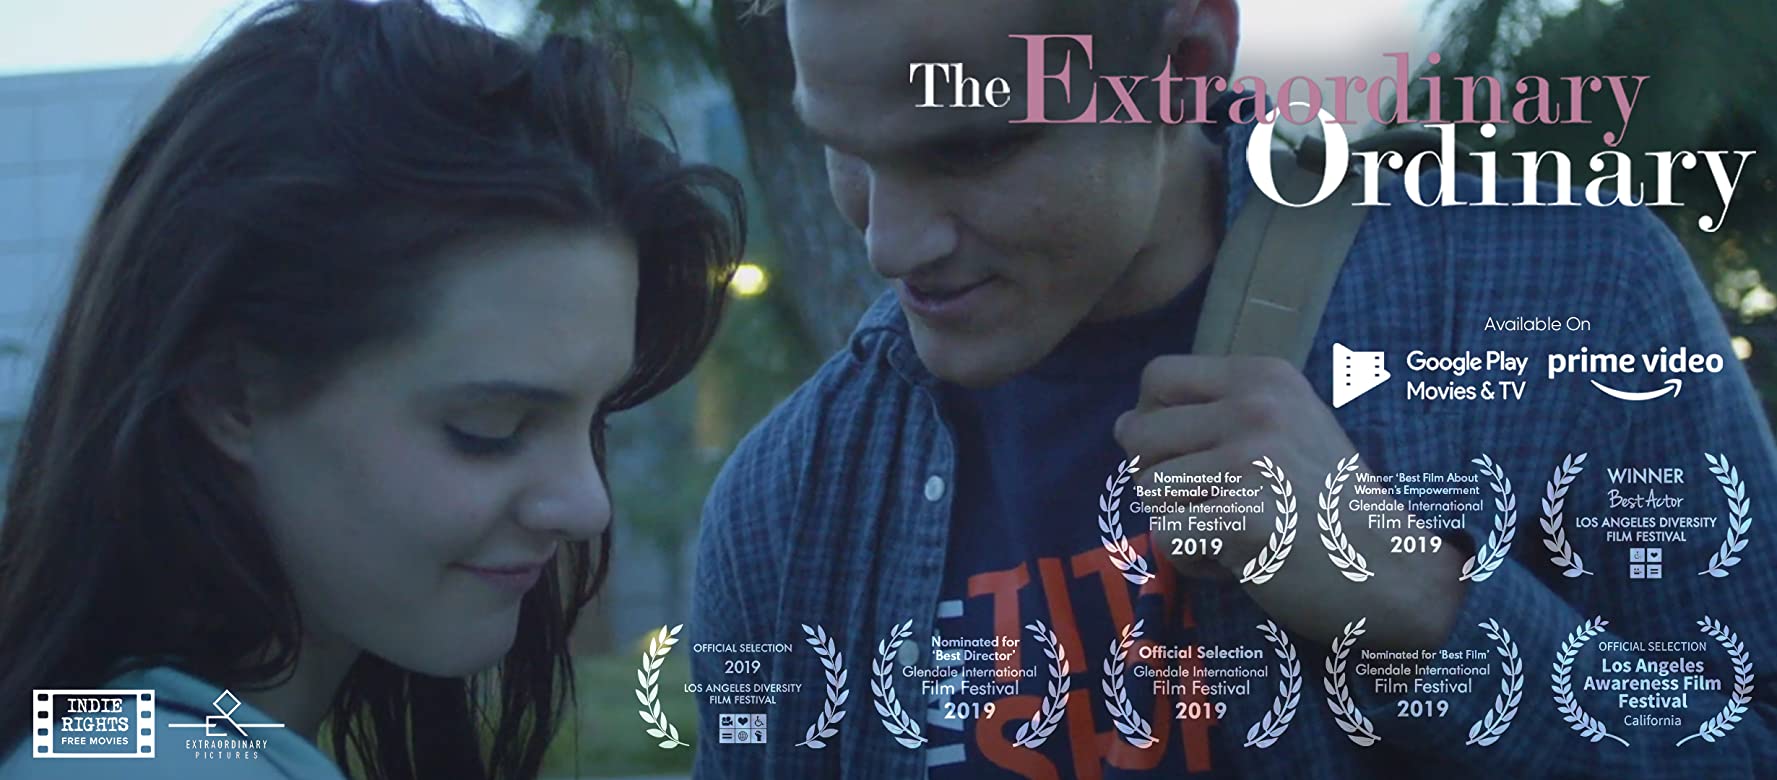 First-Time Feature Filmmaker Natalie Rodriguez Mines Mental Health in “The Extraordinary Ordinary” (2020)